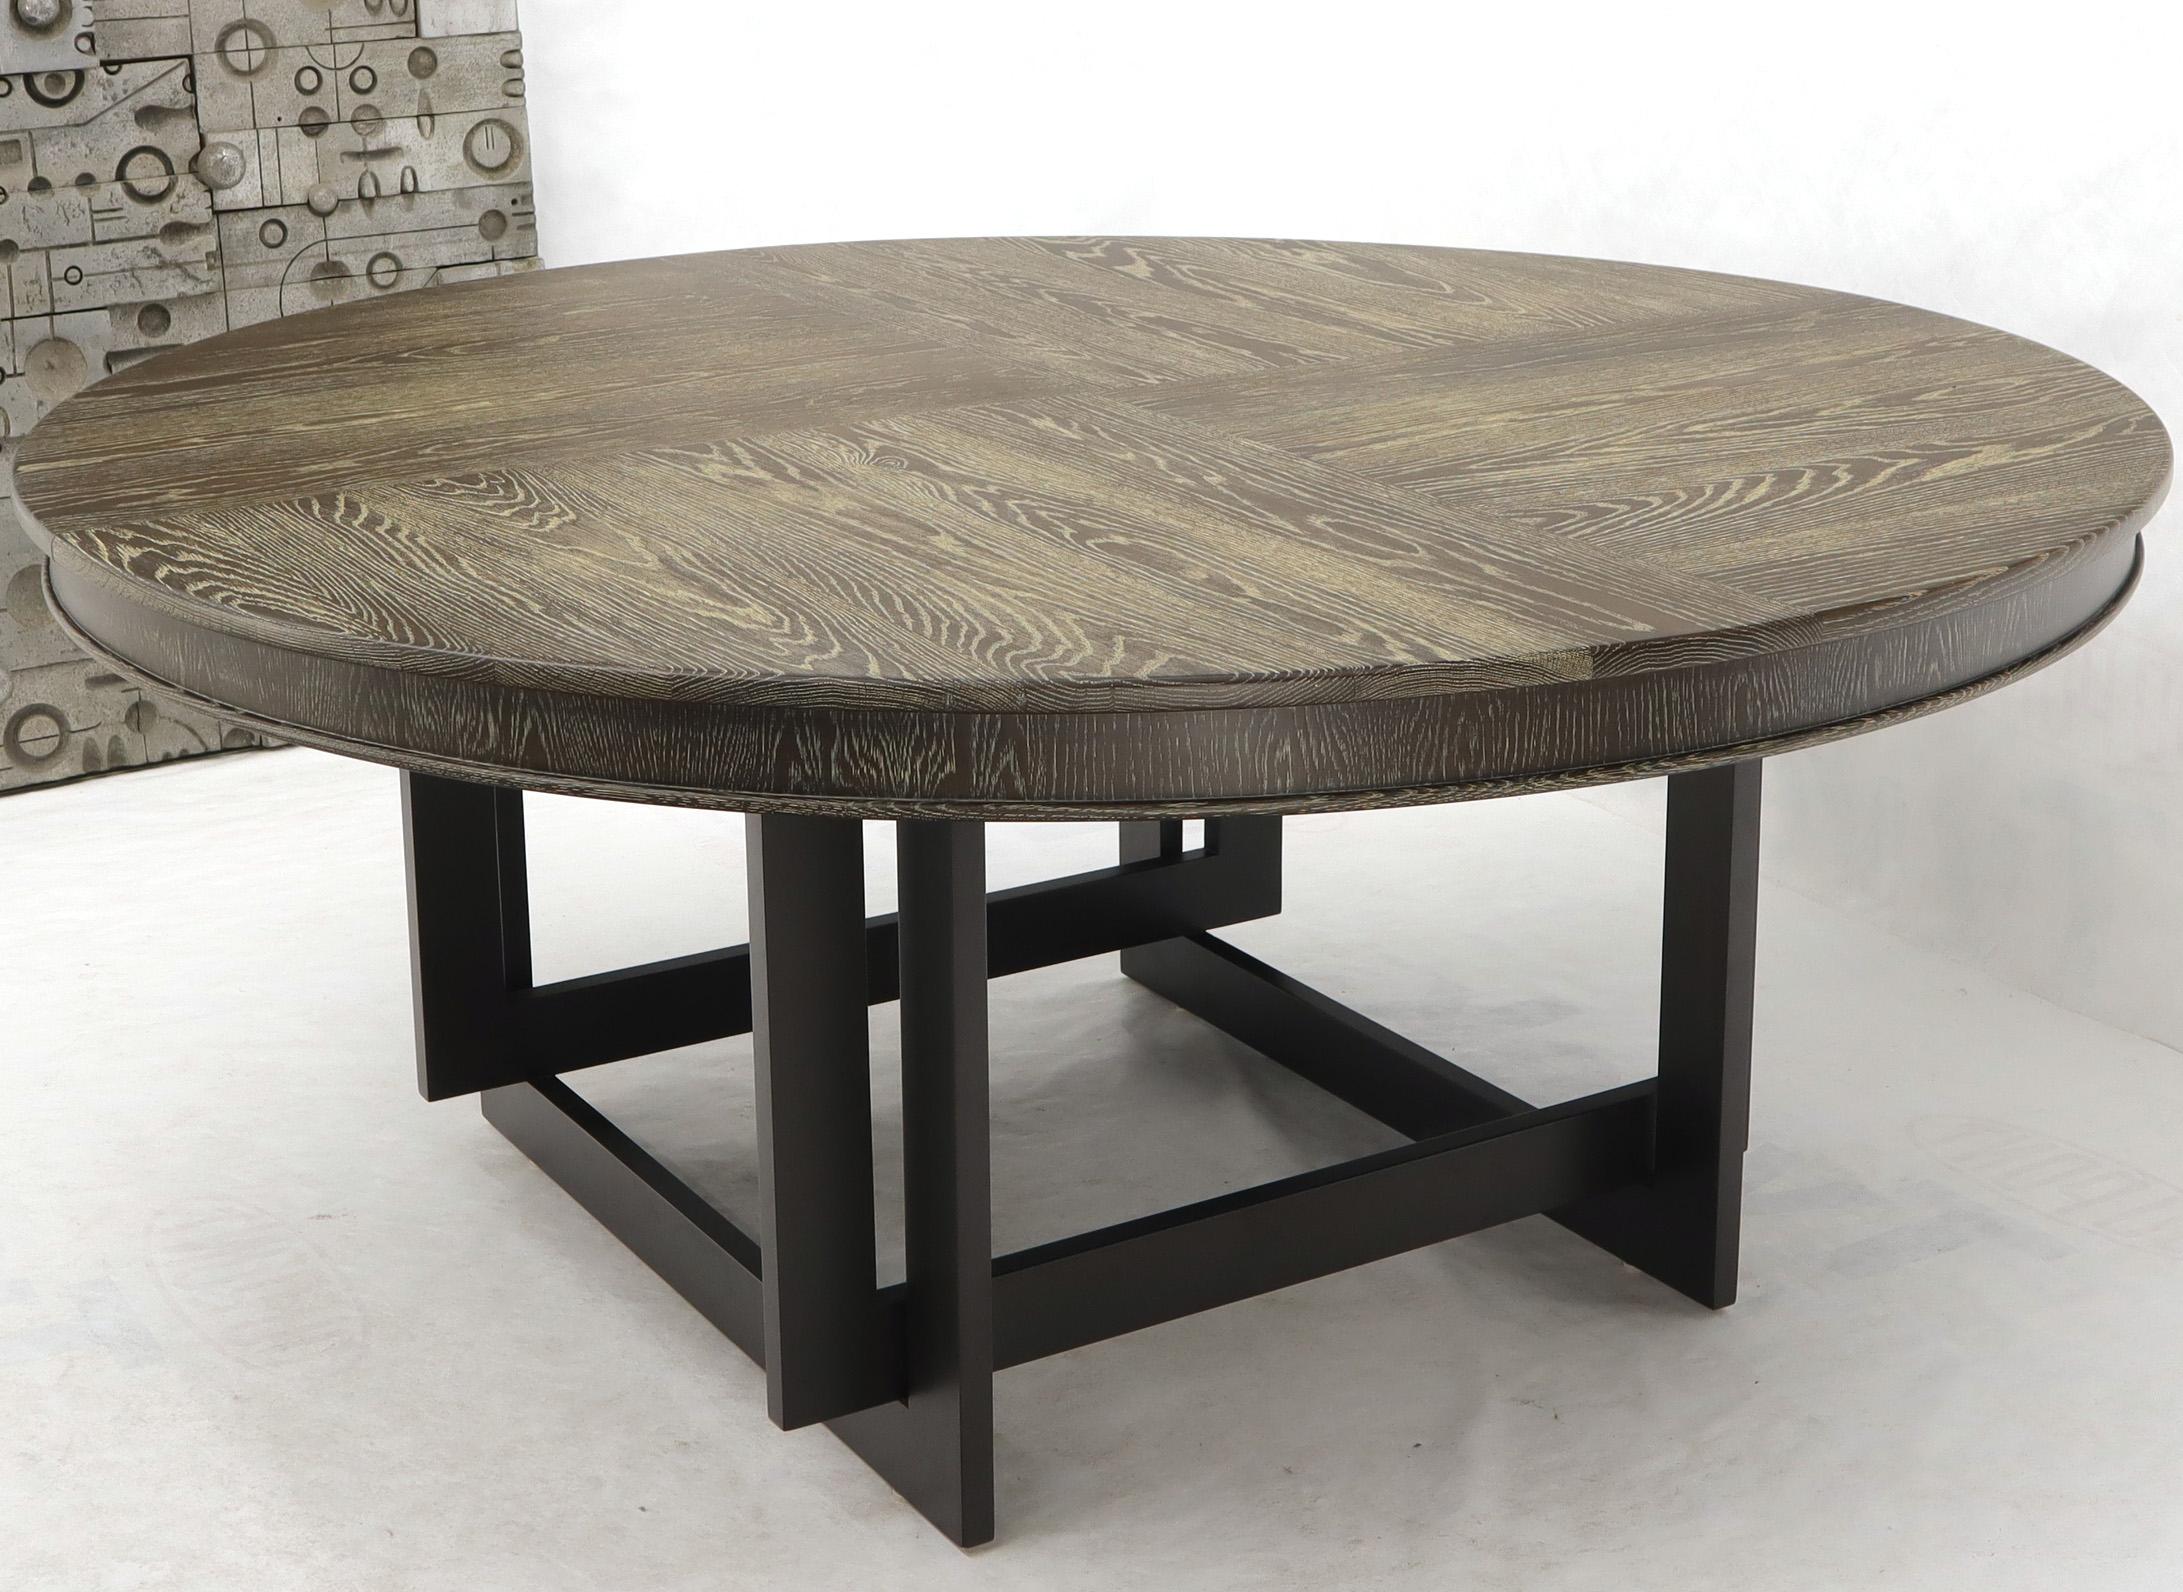 Six foot diameter round top perused oak dining or conference table. Mid-Century Modern style.